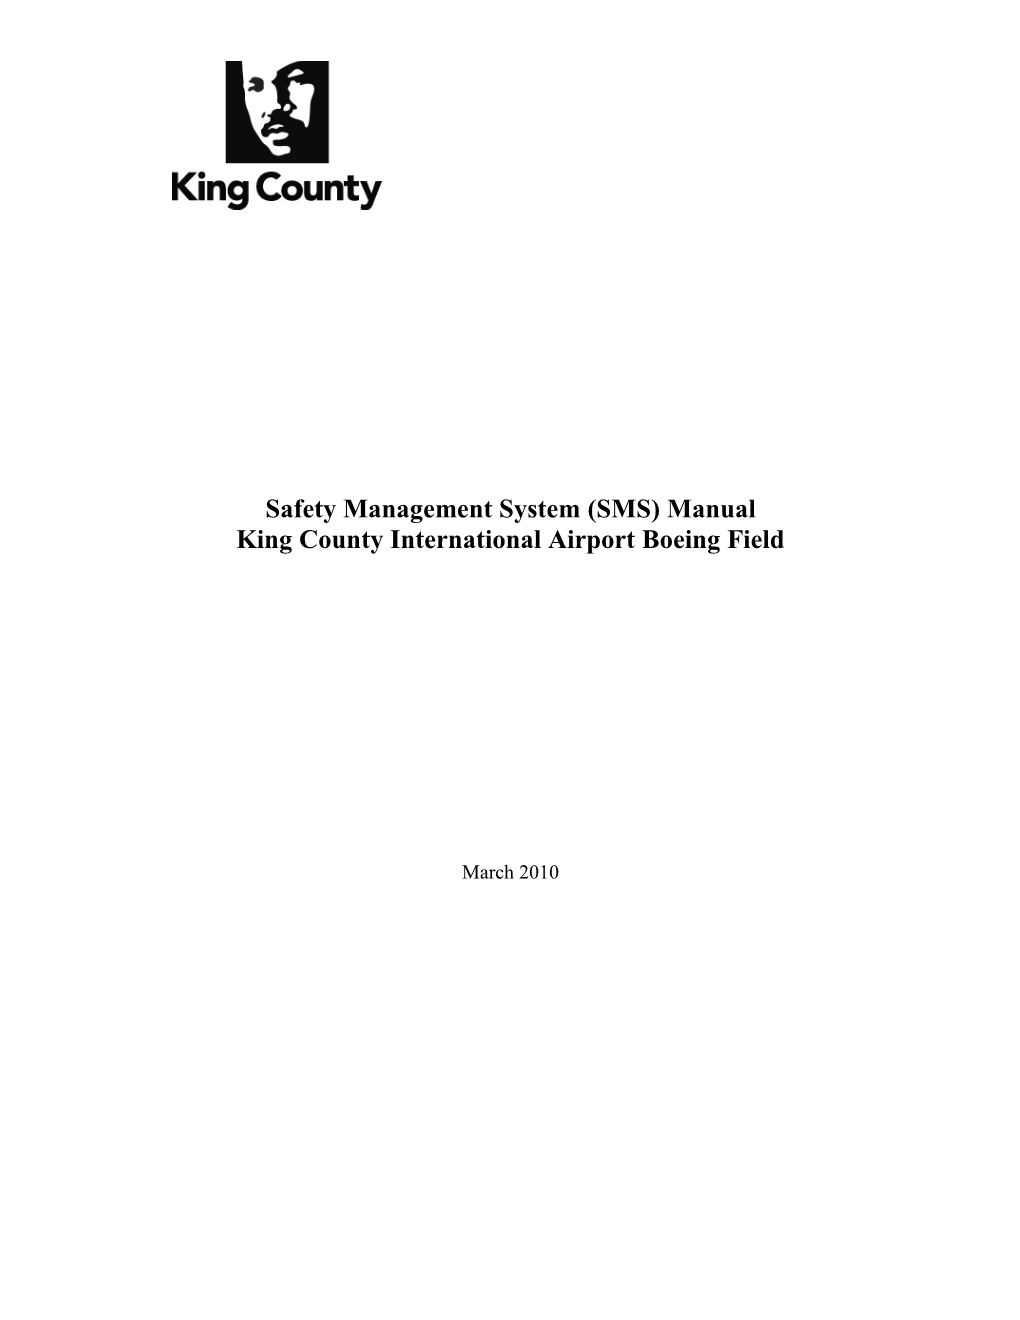 Safety Management System Program Manual for King County